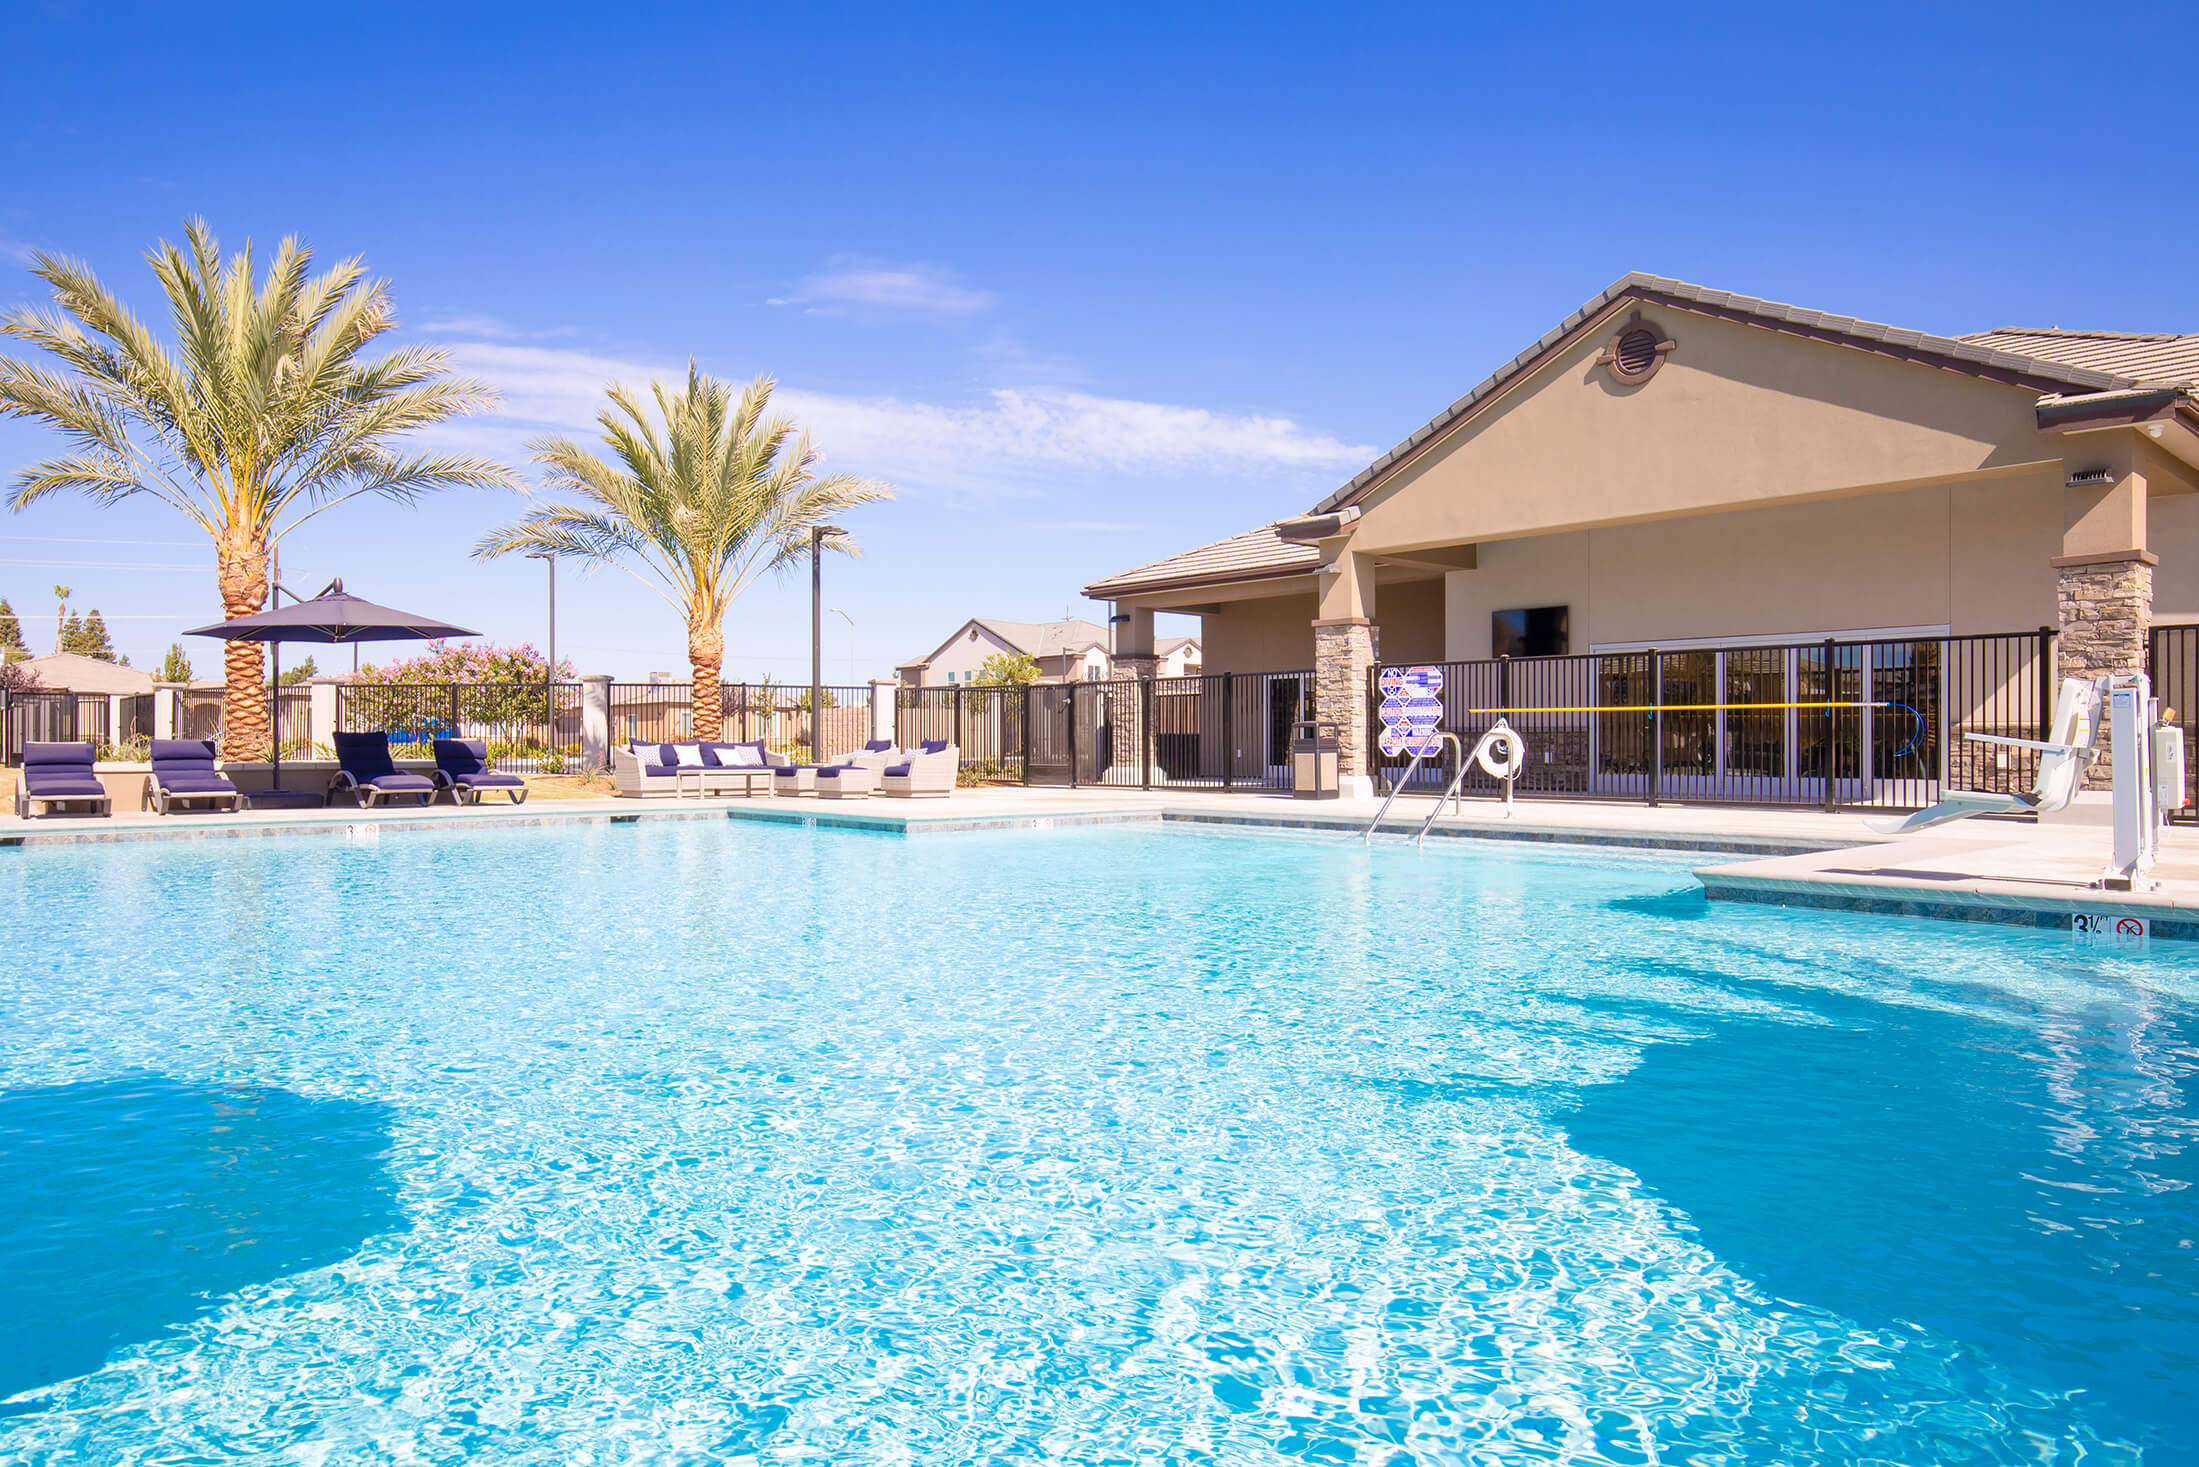 The Boardwalk Luxury Apartments - Apartments in Bakersfield, CA